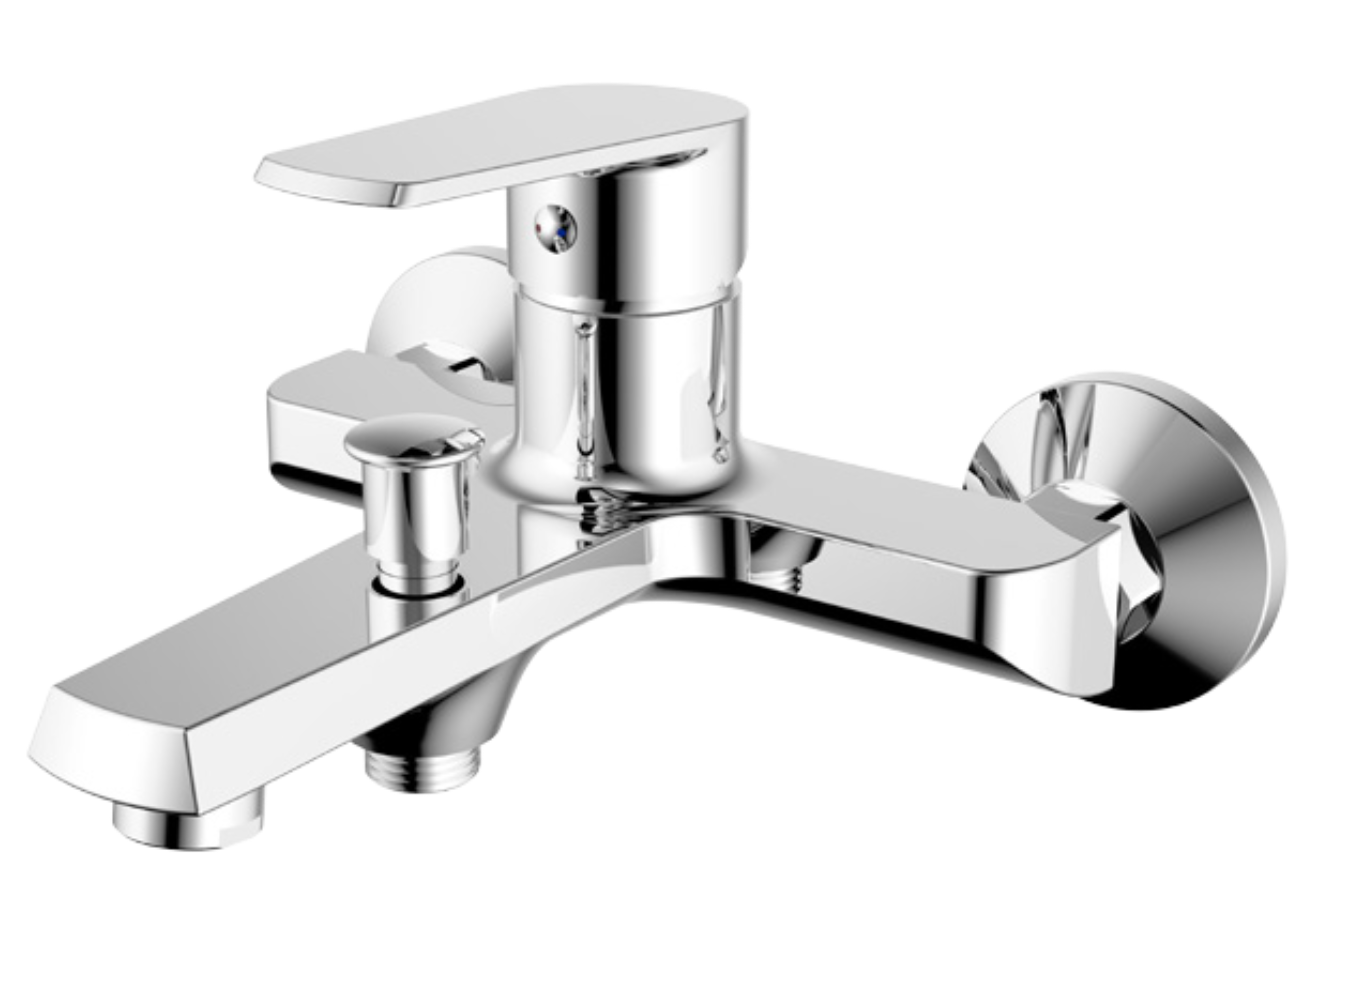 Gladys Bath Shower Mixer with Legs for Deck Mounting